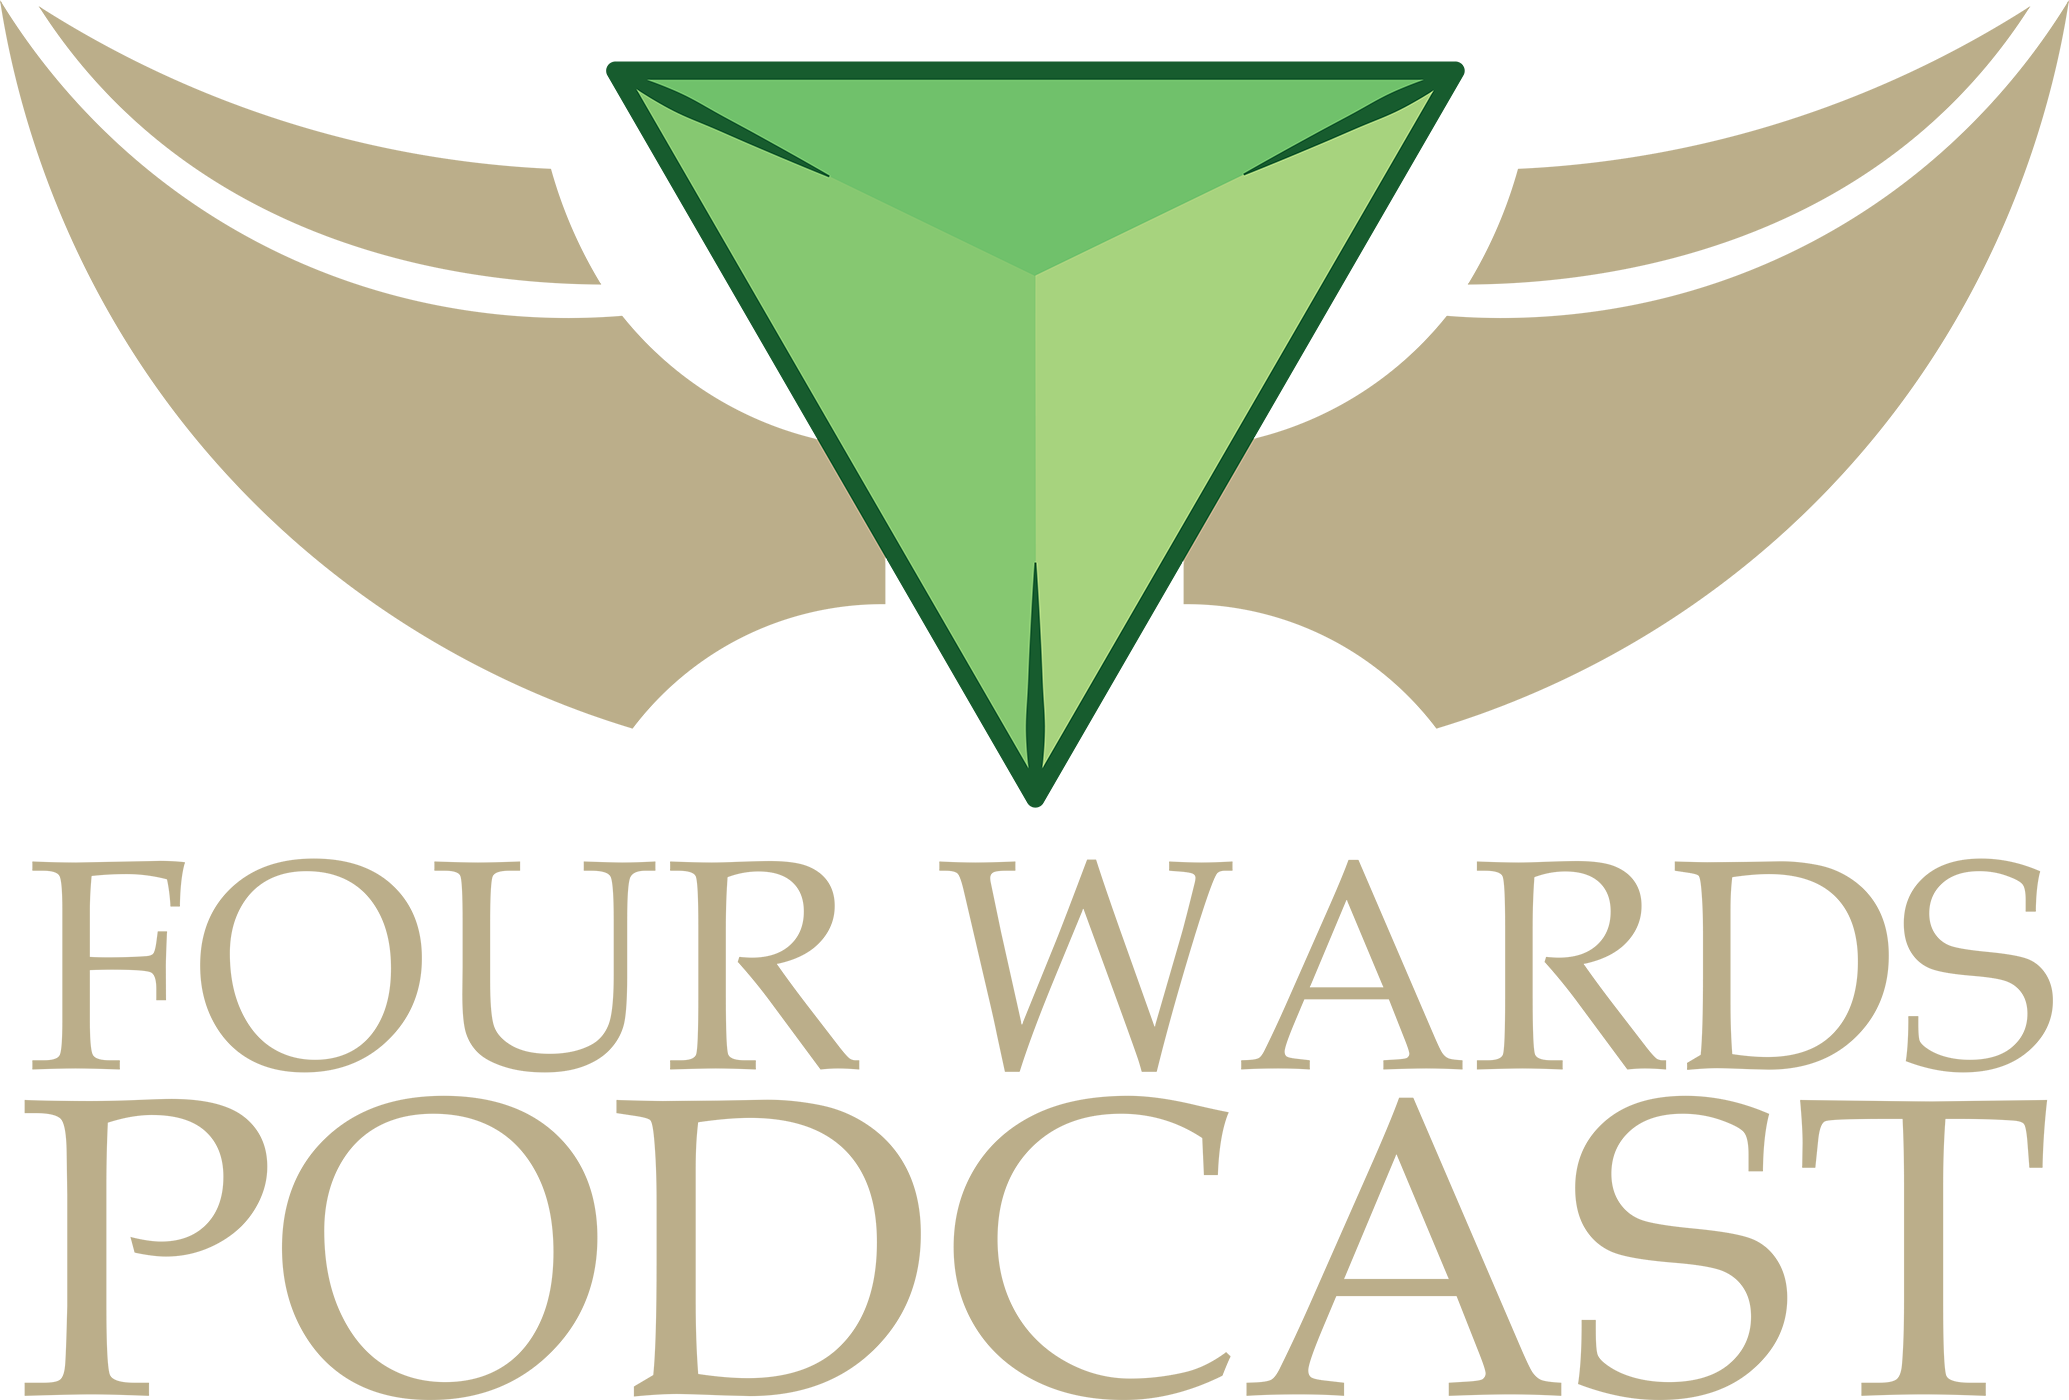 The Four Wards Podcast - Episode 399: We May Have Questions This Week But That Doesn't Mean Jax Can Come Up With a Good Title For the Episode